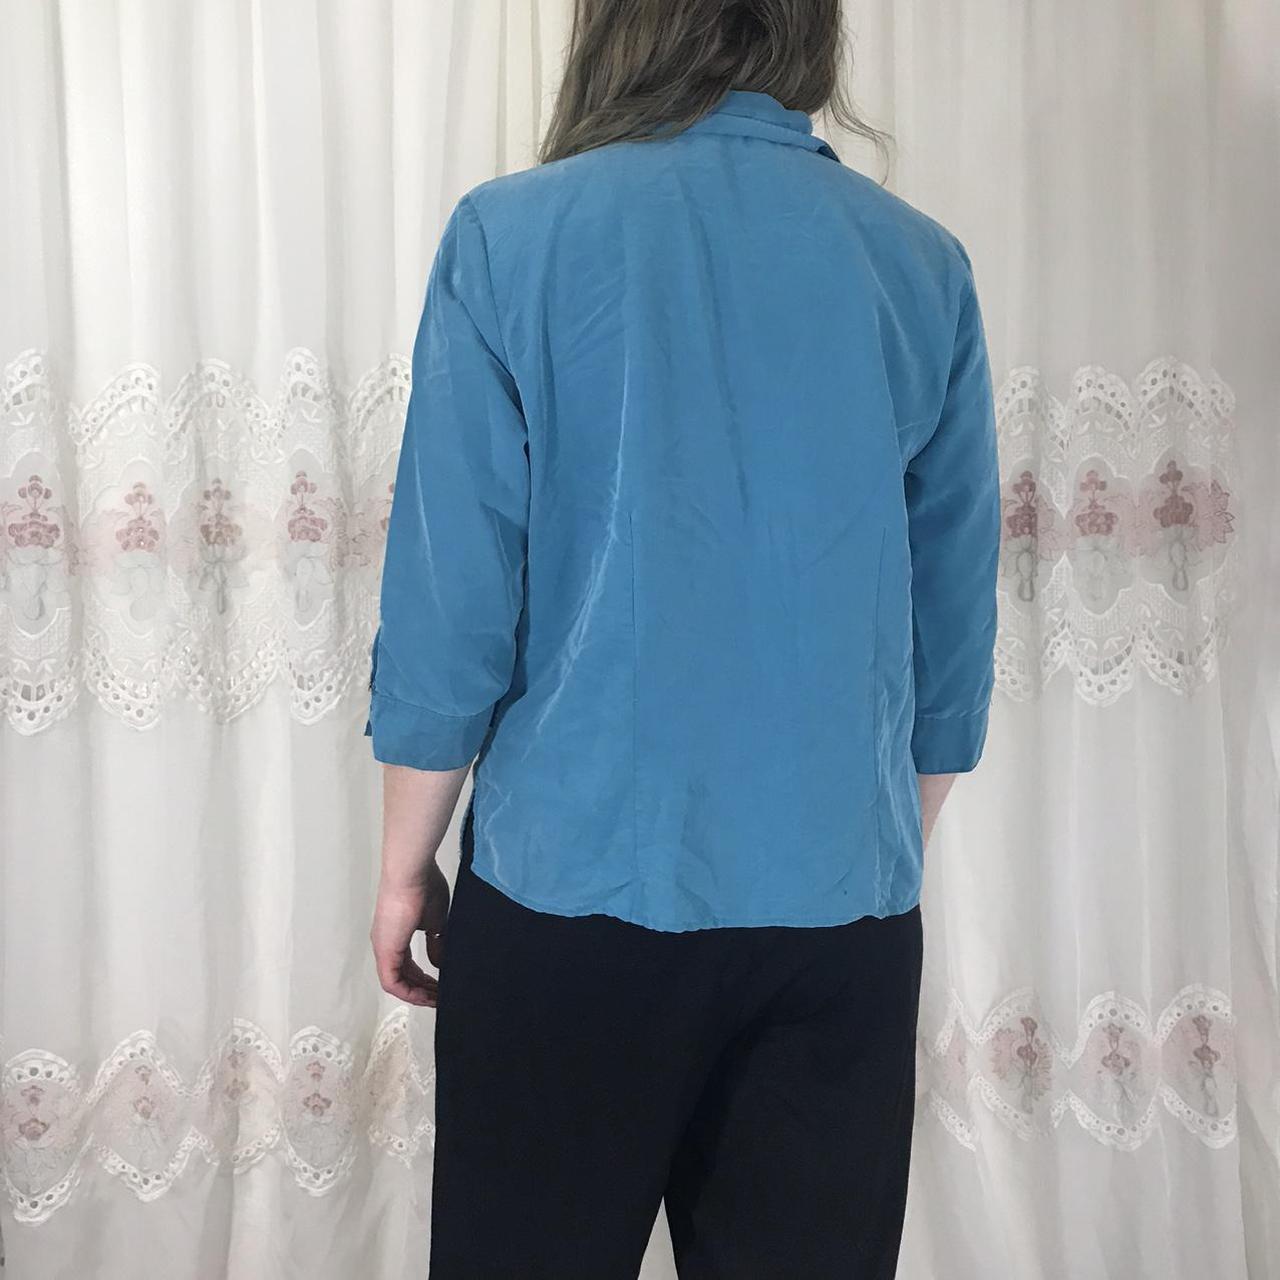 Product Image 3 - Teal 3/4 sleeve blouse, polyester